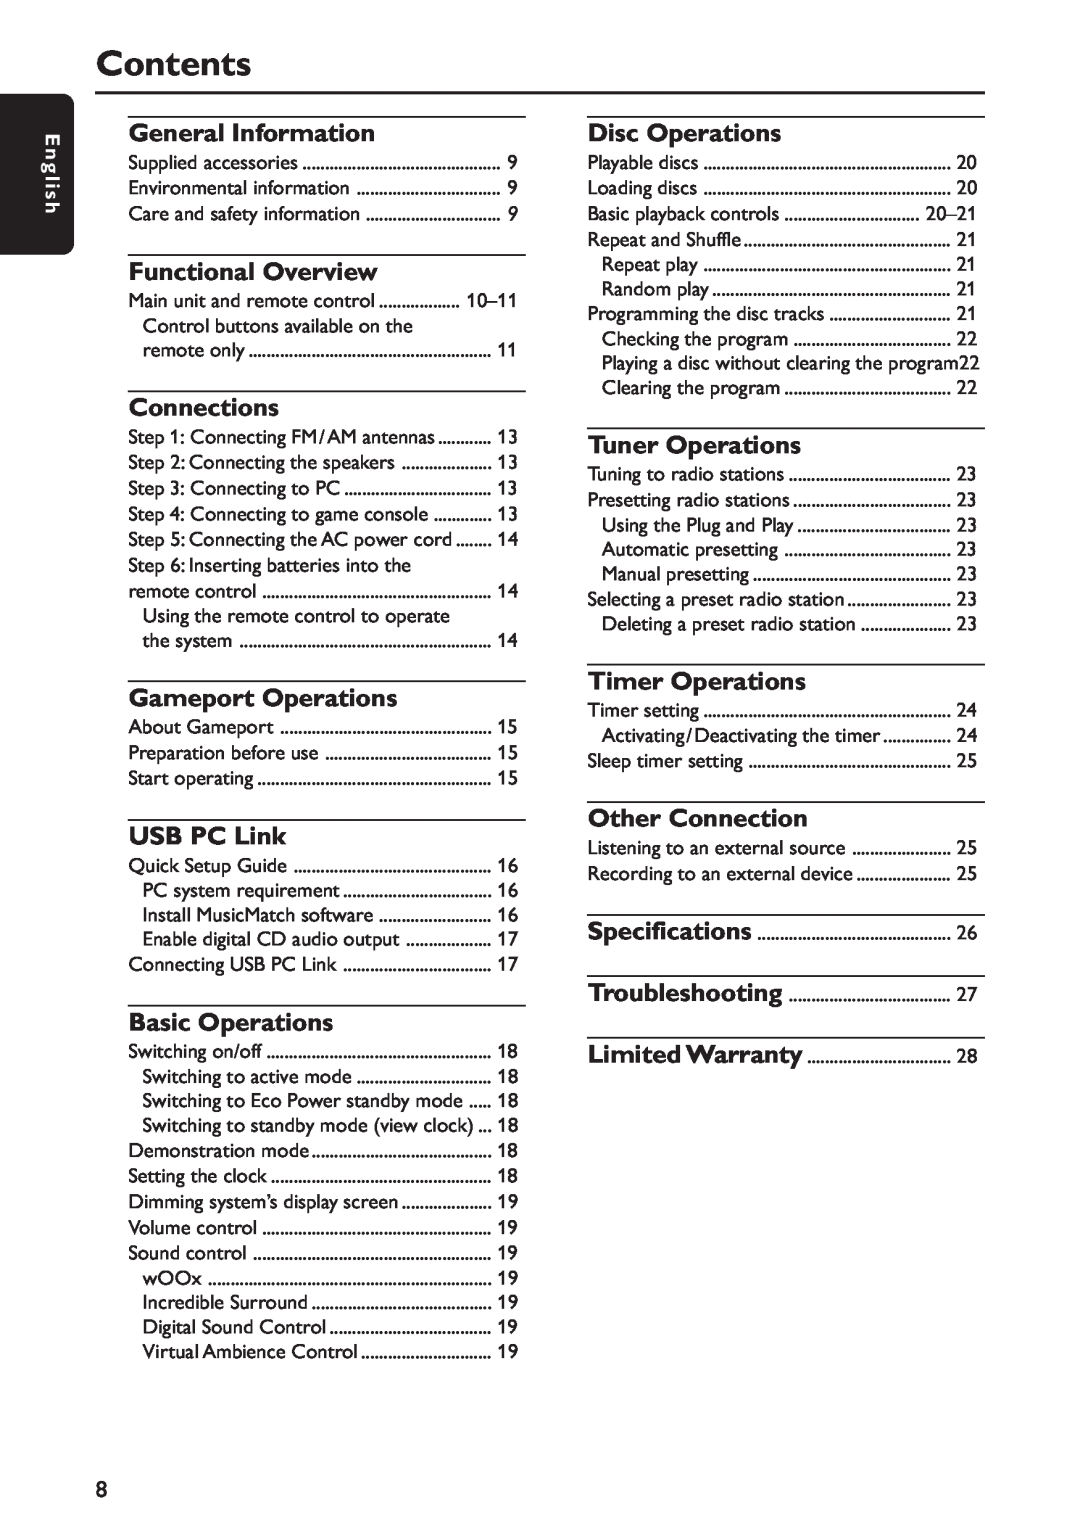 Sony FW-C777 warranty Contents, General Information, Functional Overview, Connections, Gameport Operations, Disc Operations 